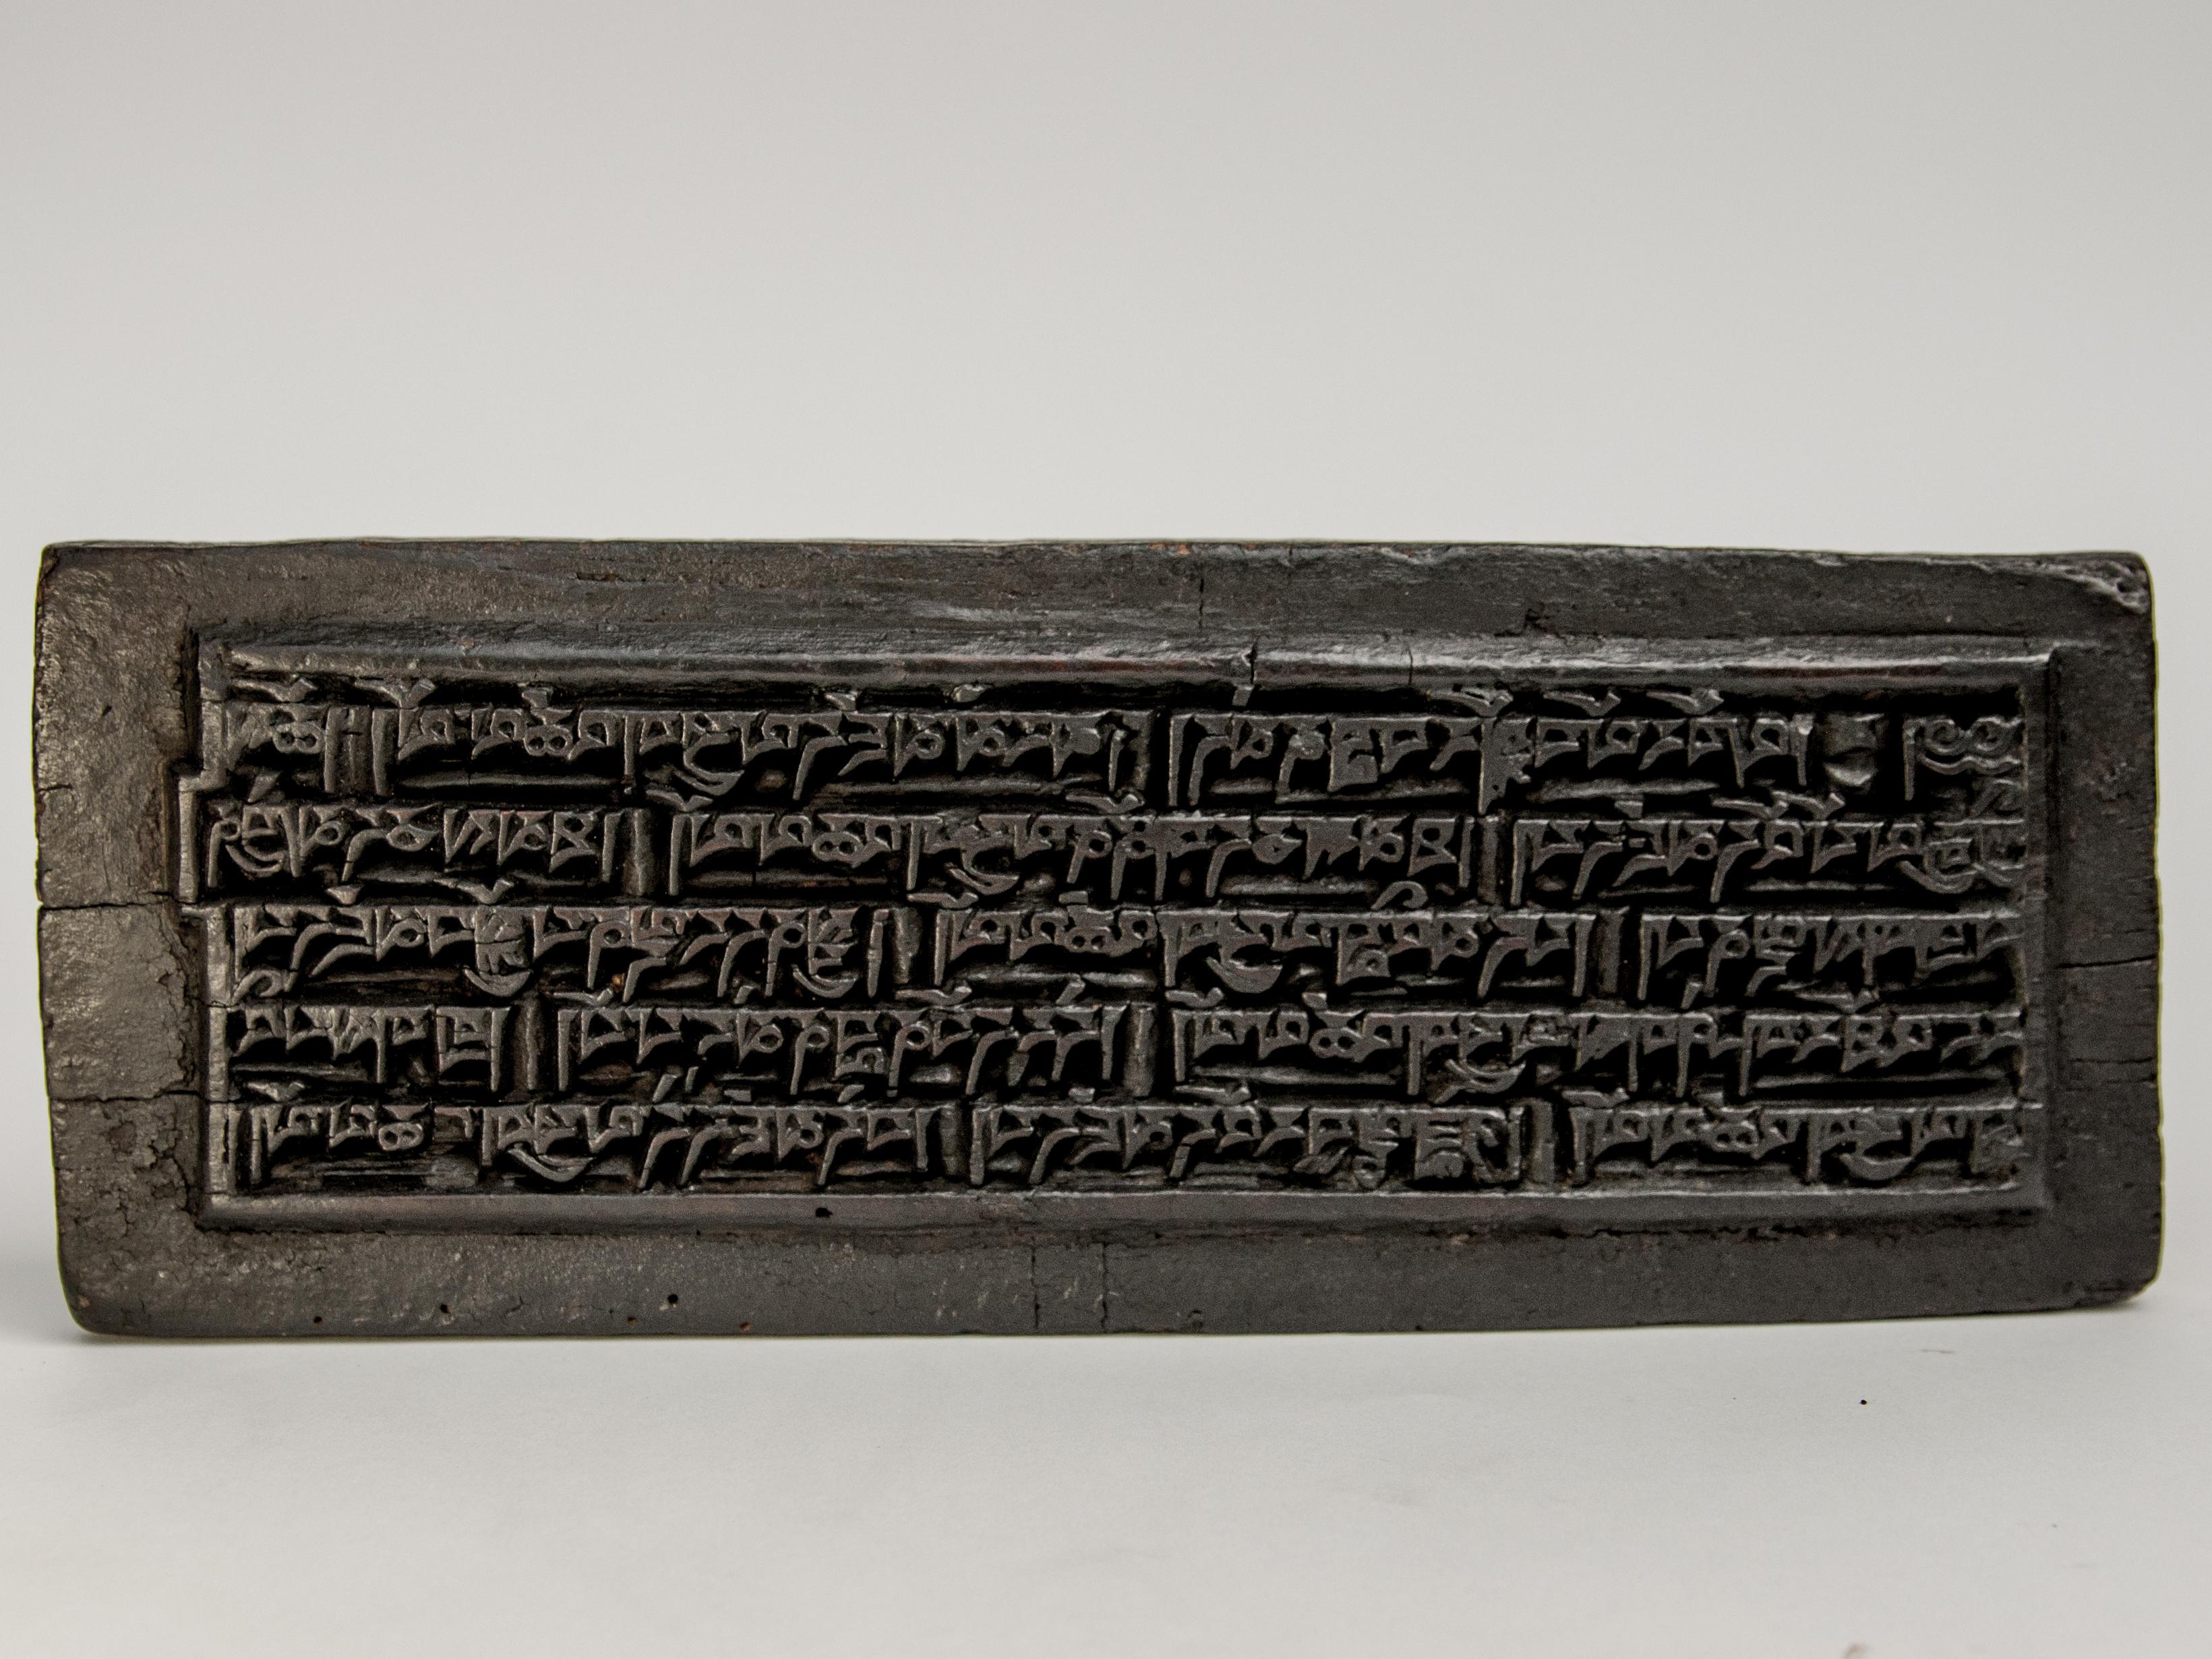 Wood print block hand-carved. Tibet. Early 20th century. Religious text.
Hand-carved from wood, this block was used to print religious texts which were bound together and preserved in temples and monasteries and used for recitation in ceremonies and